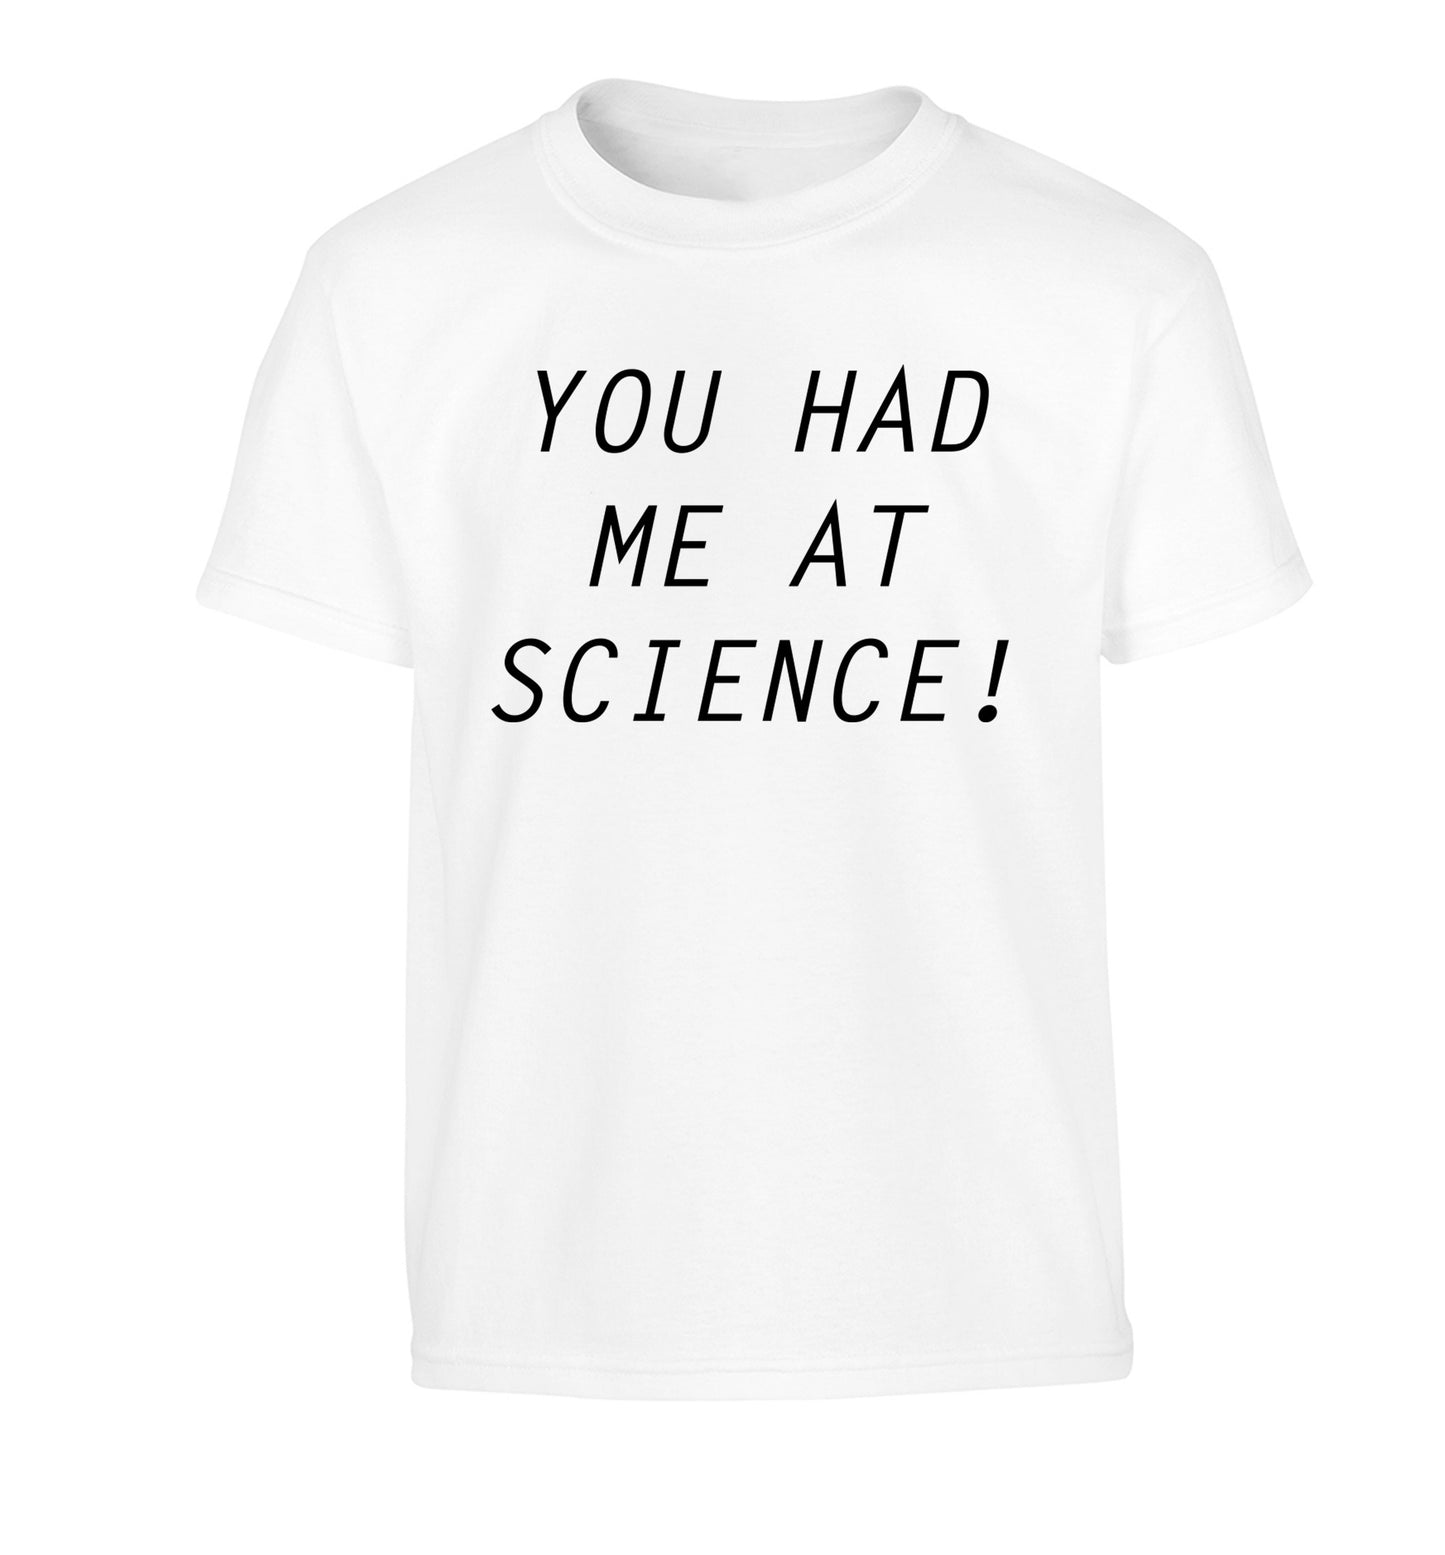 You had me at science Children's white Tshirt 12-14 Years